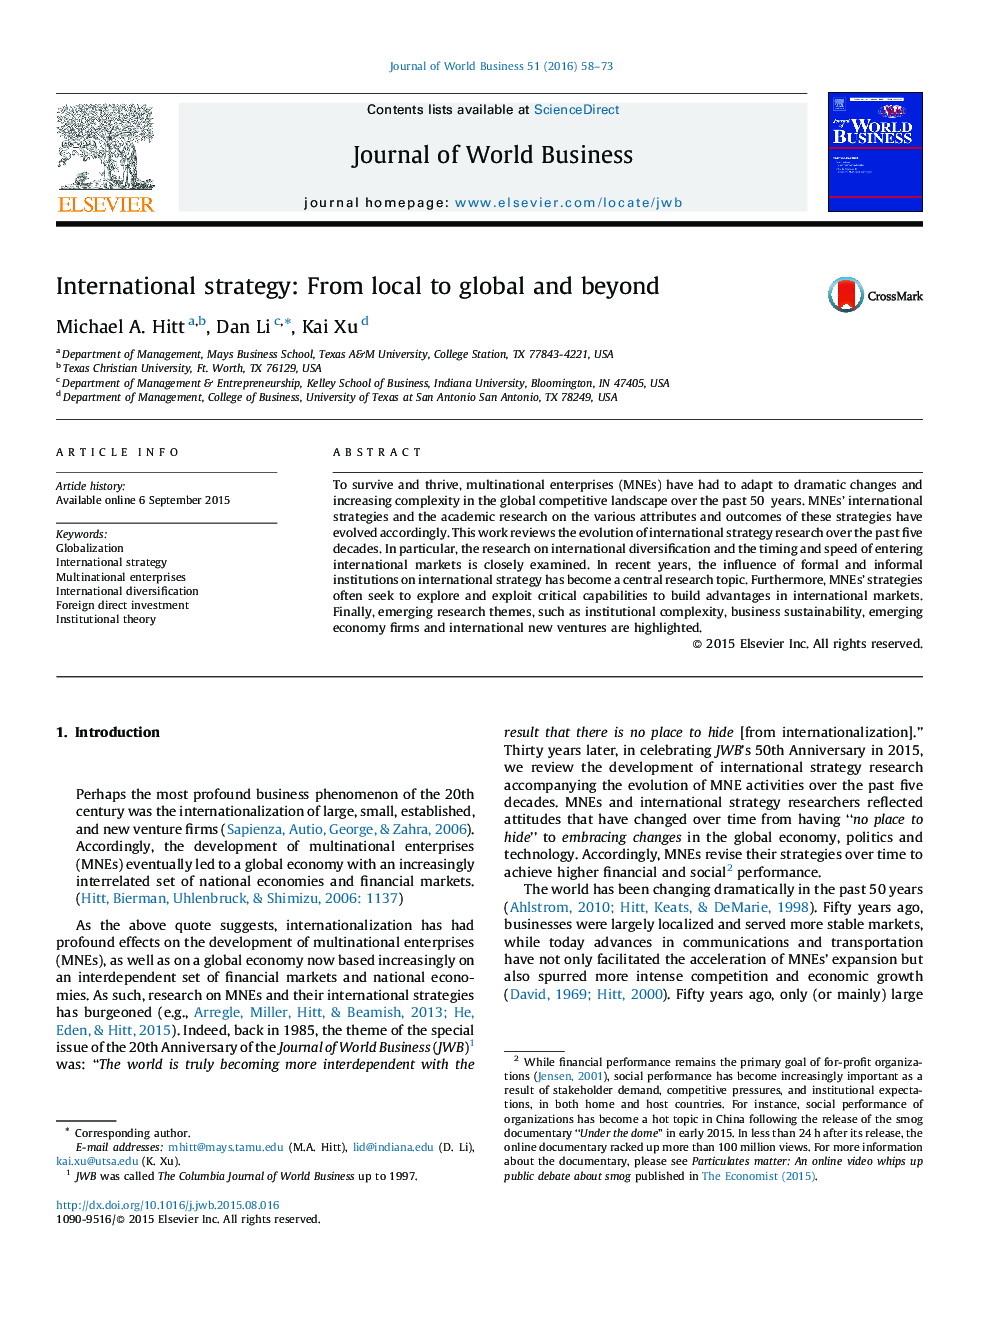 International strategy: From local to global and beyond